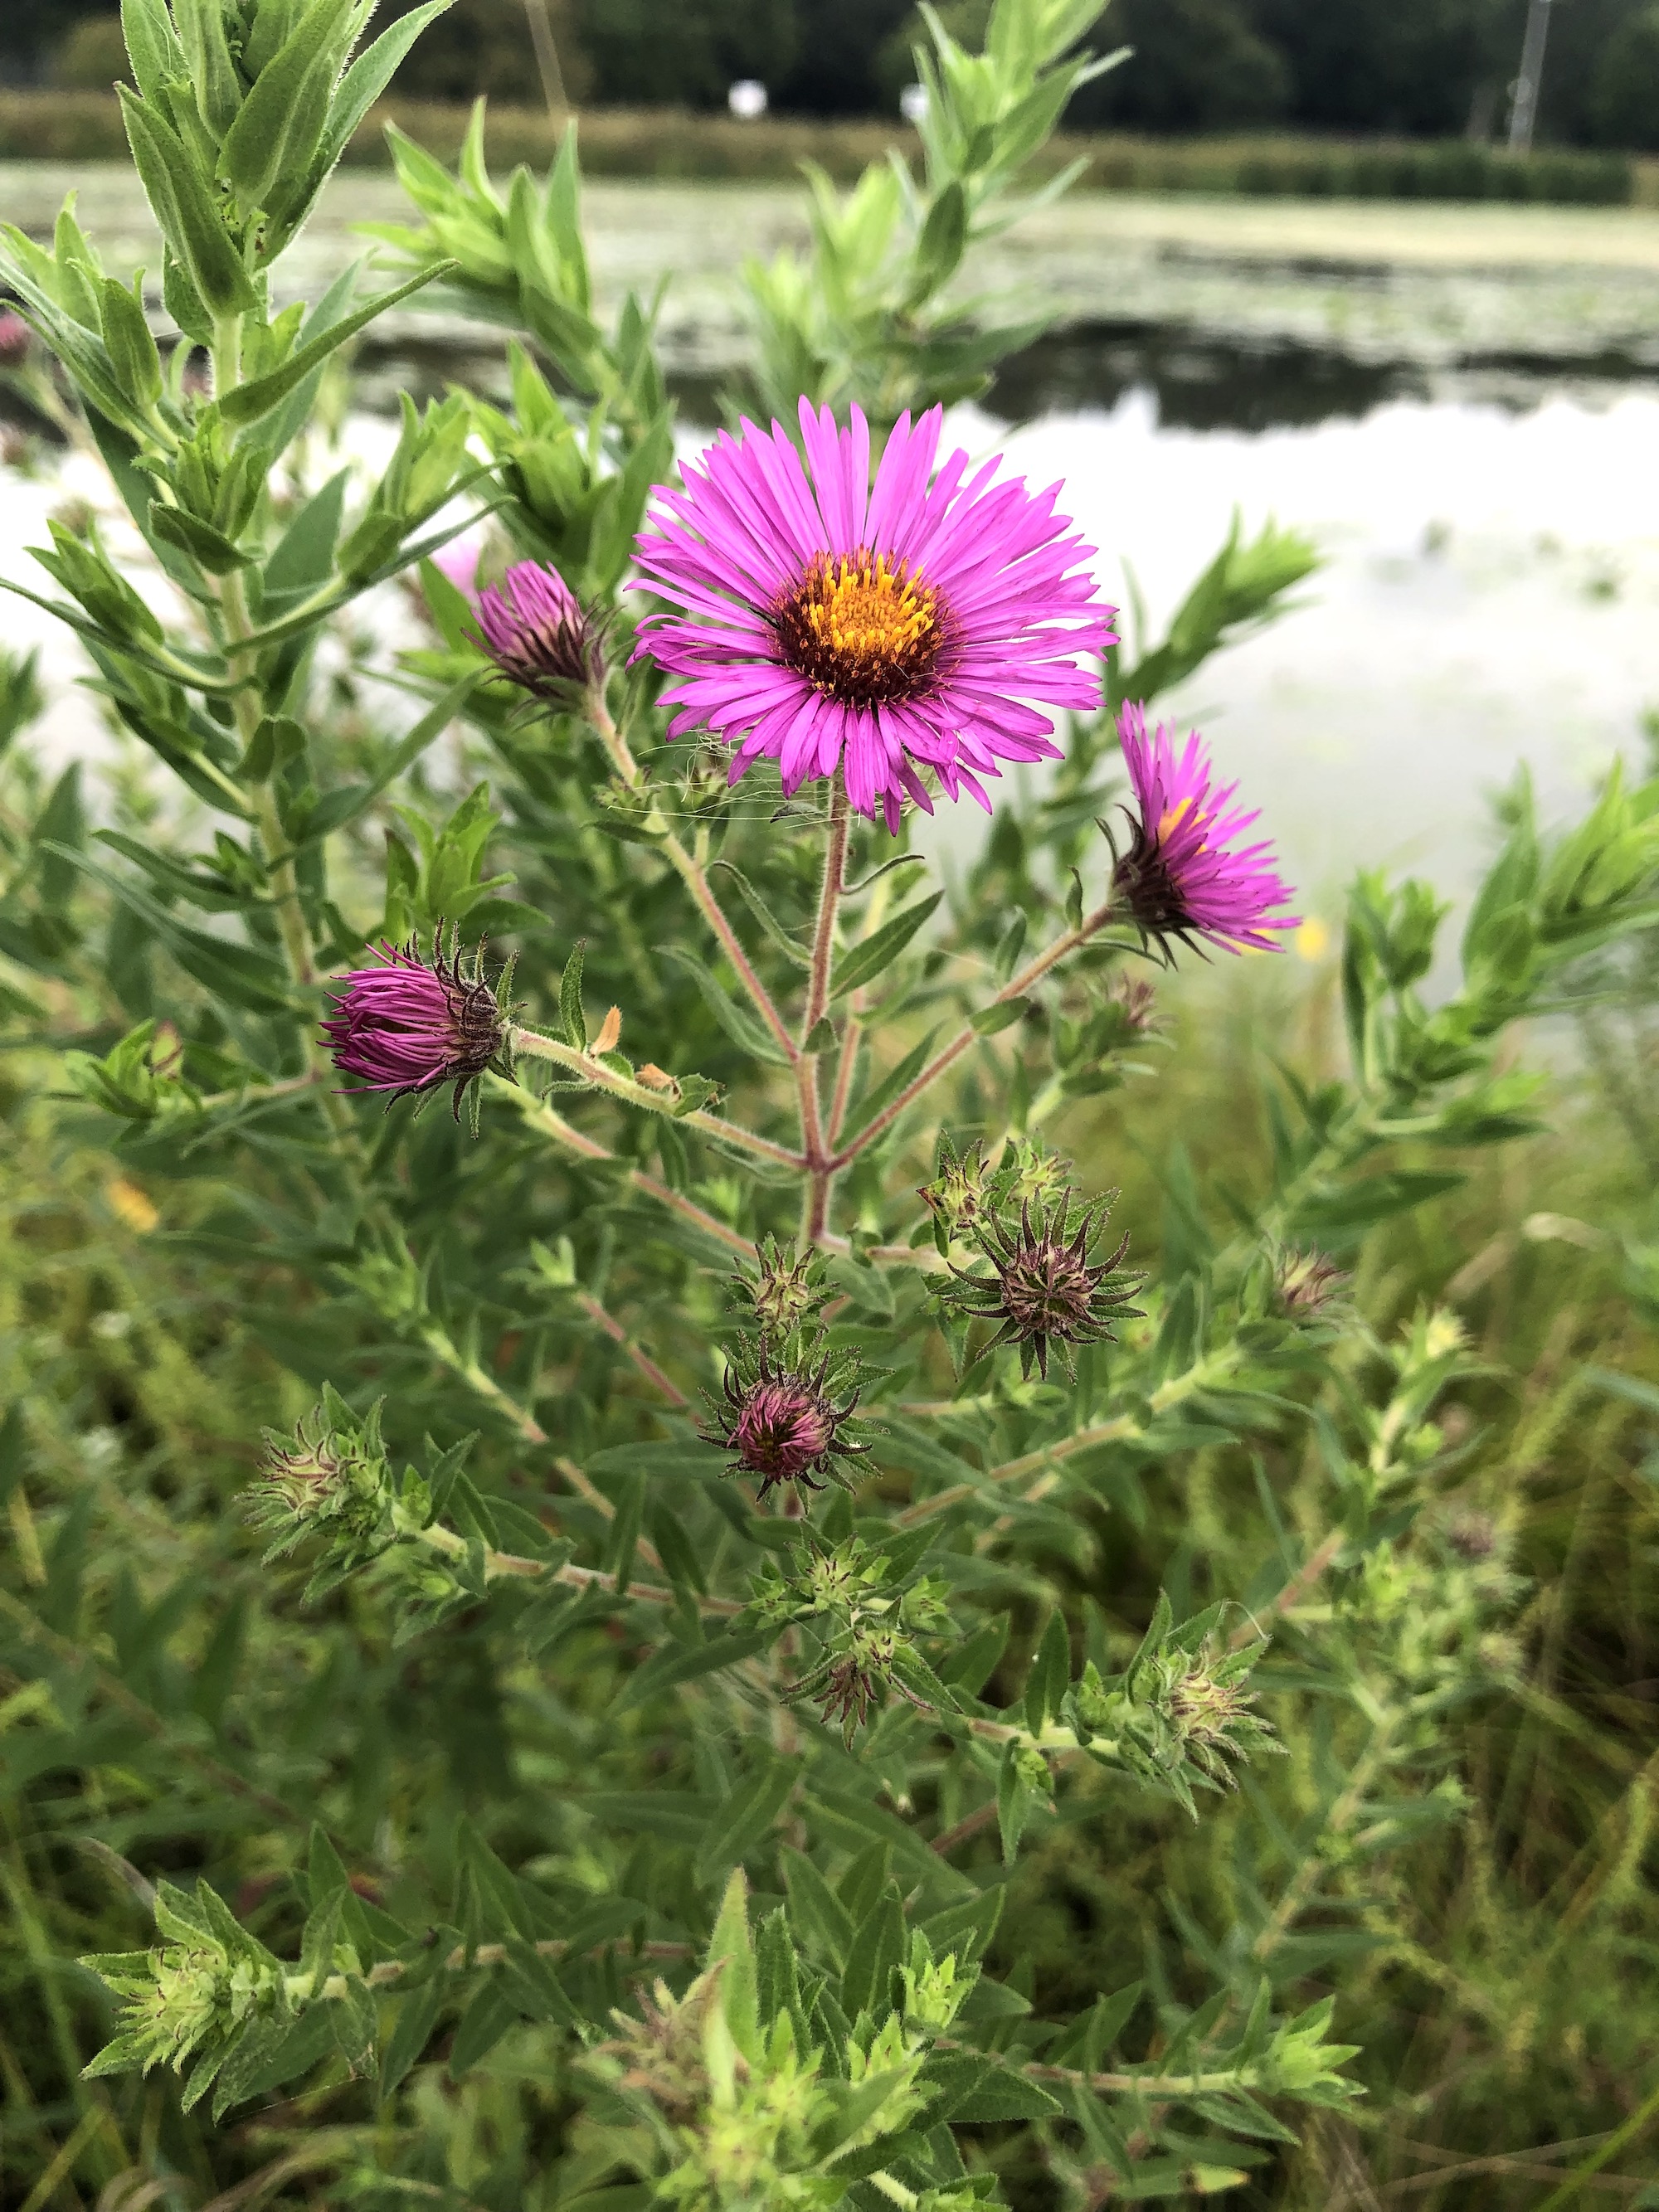 New England Aster on shore of Vilas Park Lagoon in Madison, Wisconsin on September 4, 2021.